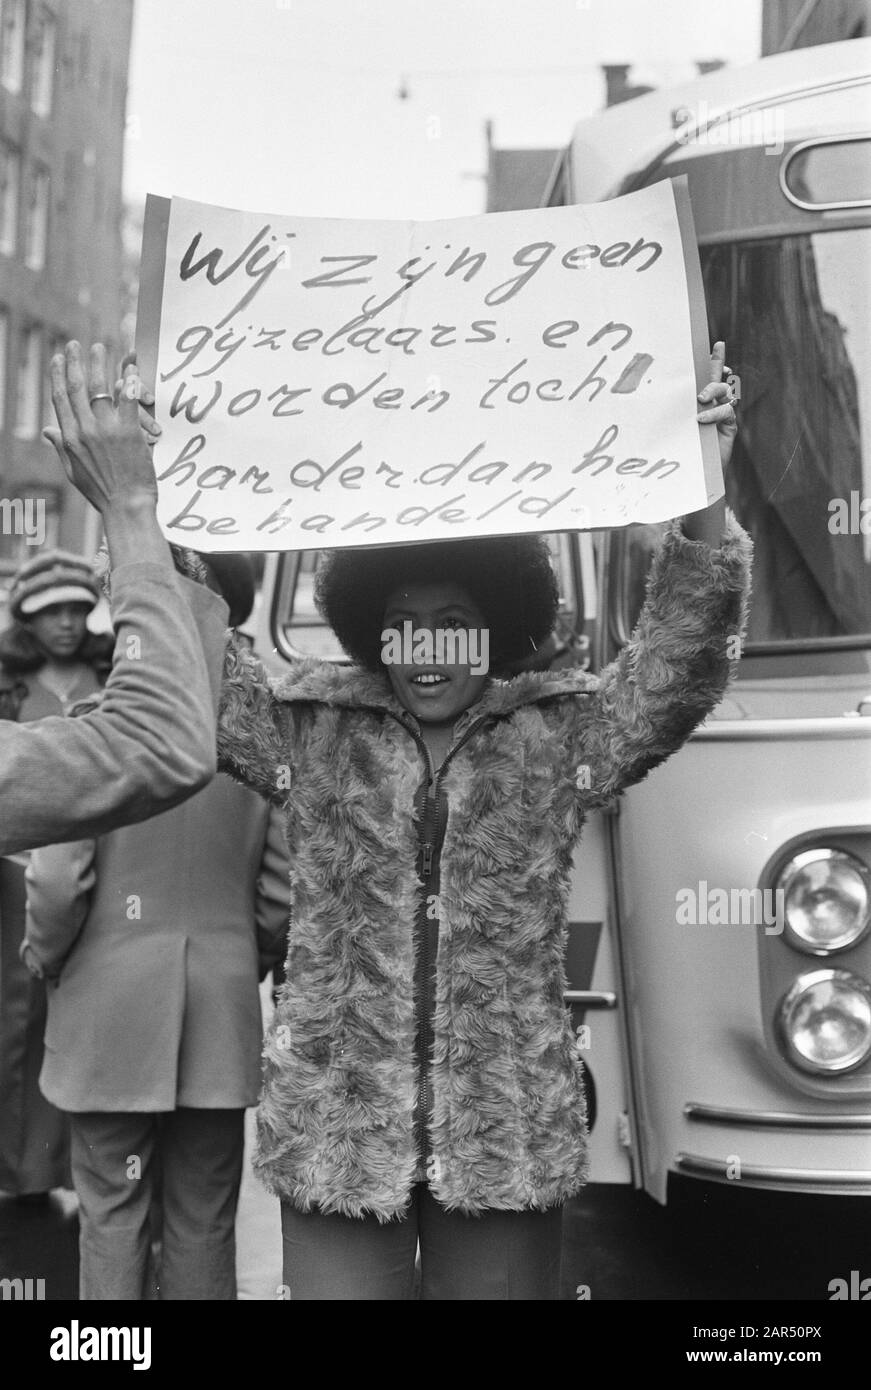 City Council of Amsterdam handles budget 1975; Surinamer with protest board Date: 30 October 1974 Location: Amsterdam, Noord-Holland Keywords: municipal councils, protests Stock Photo